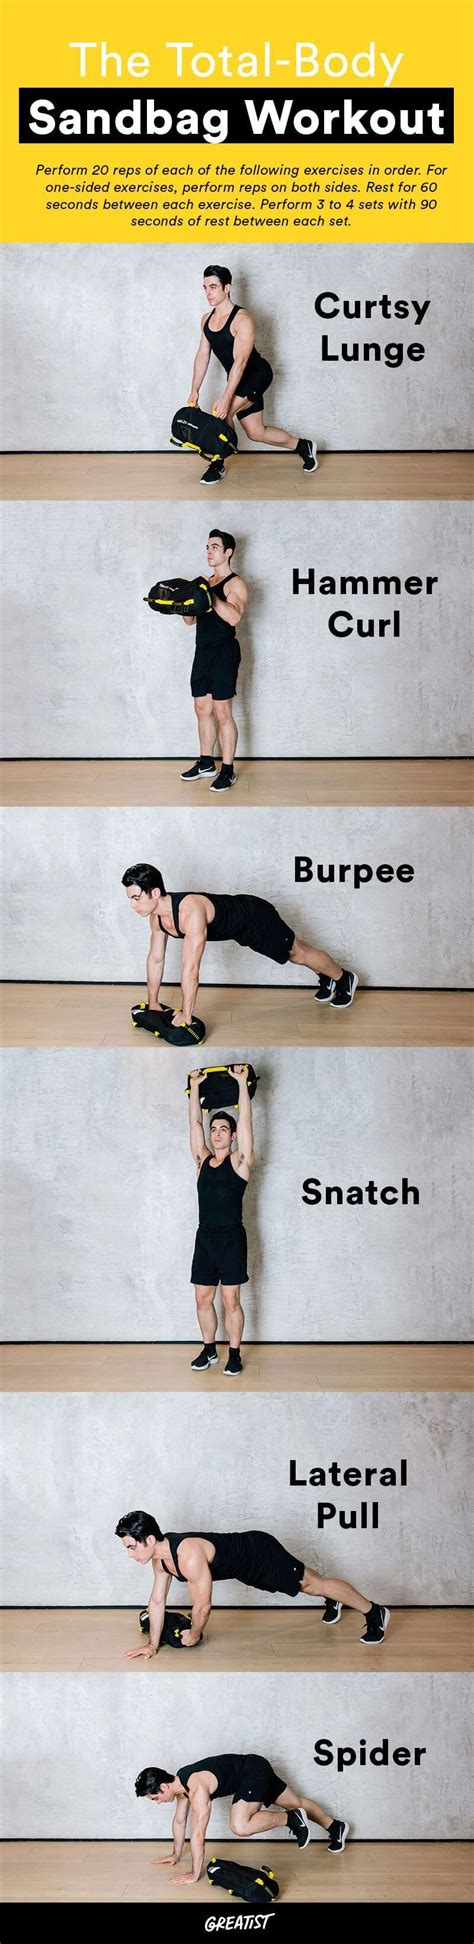 Upper Body Sandbag Workout For Gym Fitness And Workout Abs Tutorial